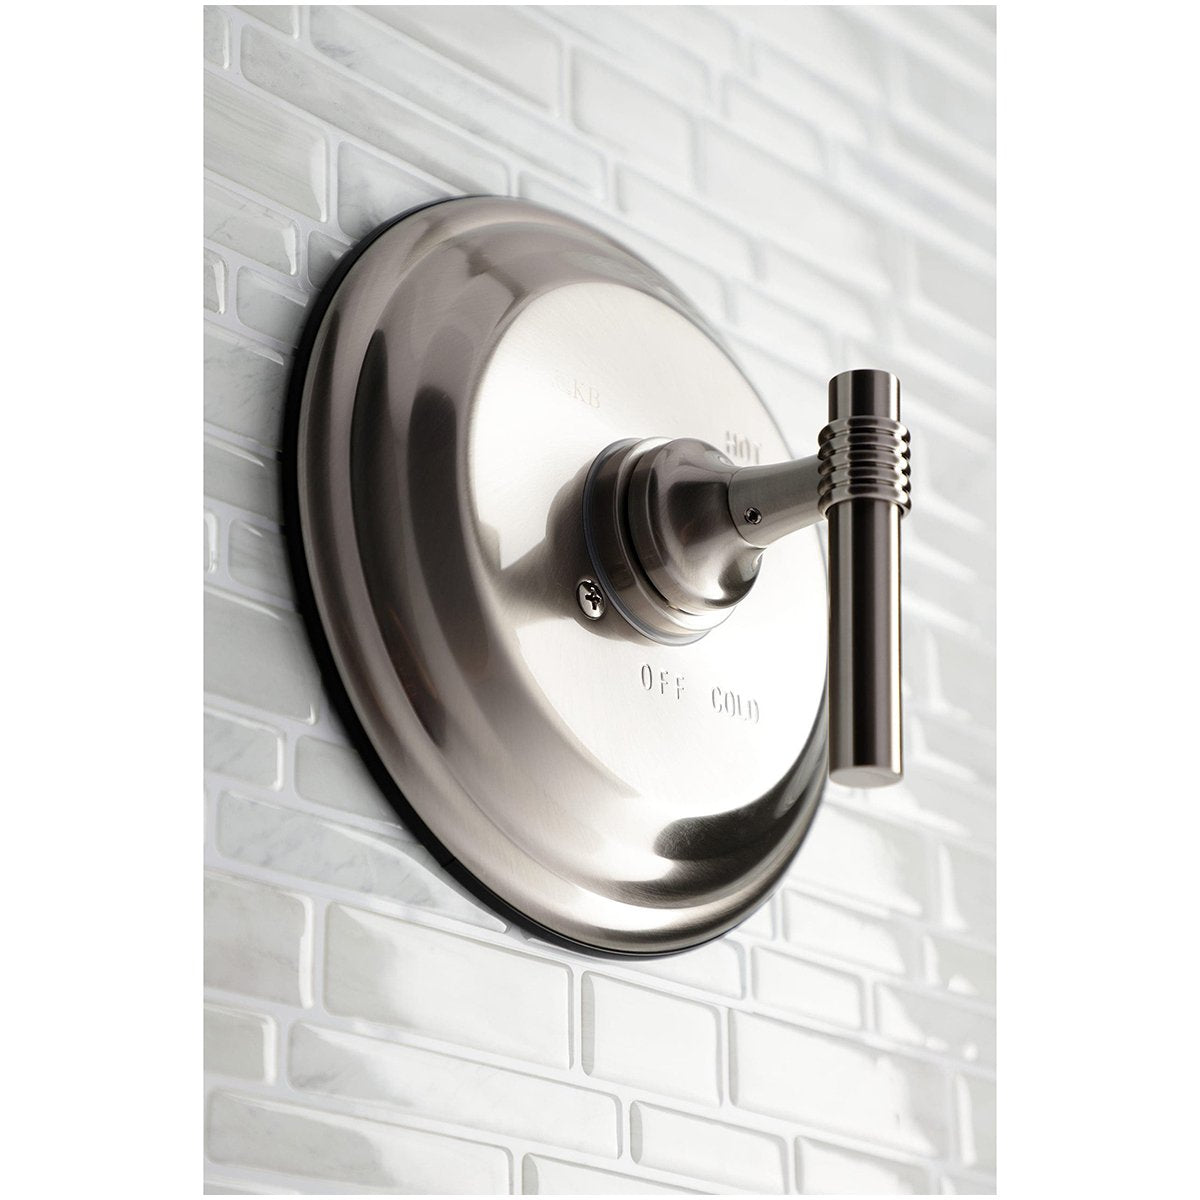 Kingston Brass Pressure Balance Valve Trim Only Without Shower and Tub Spout in Brushed Nickel